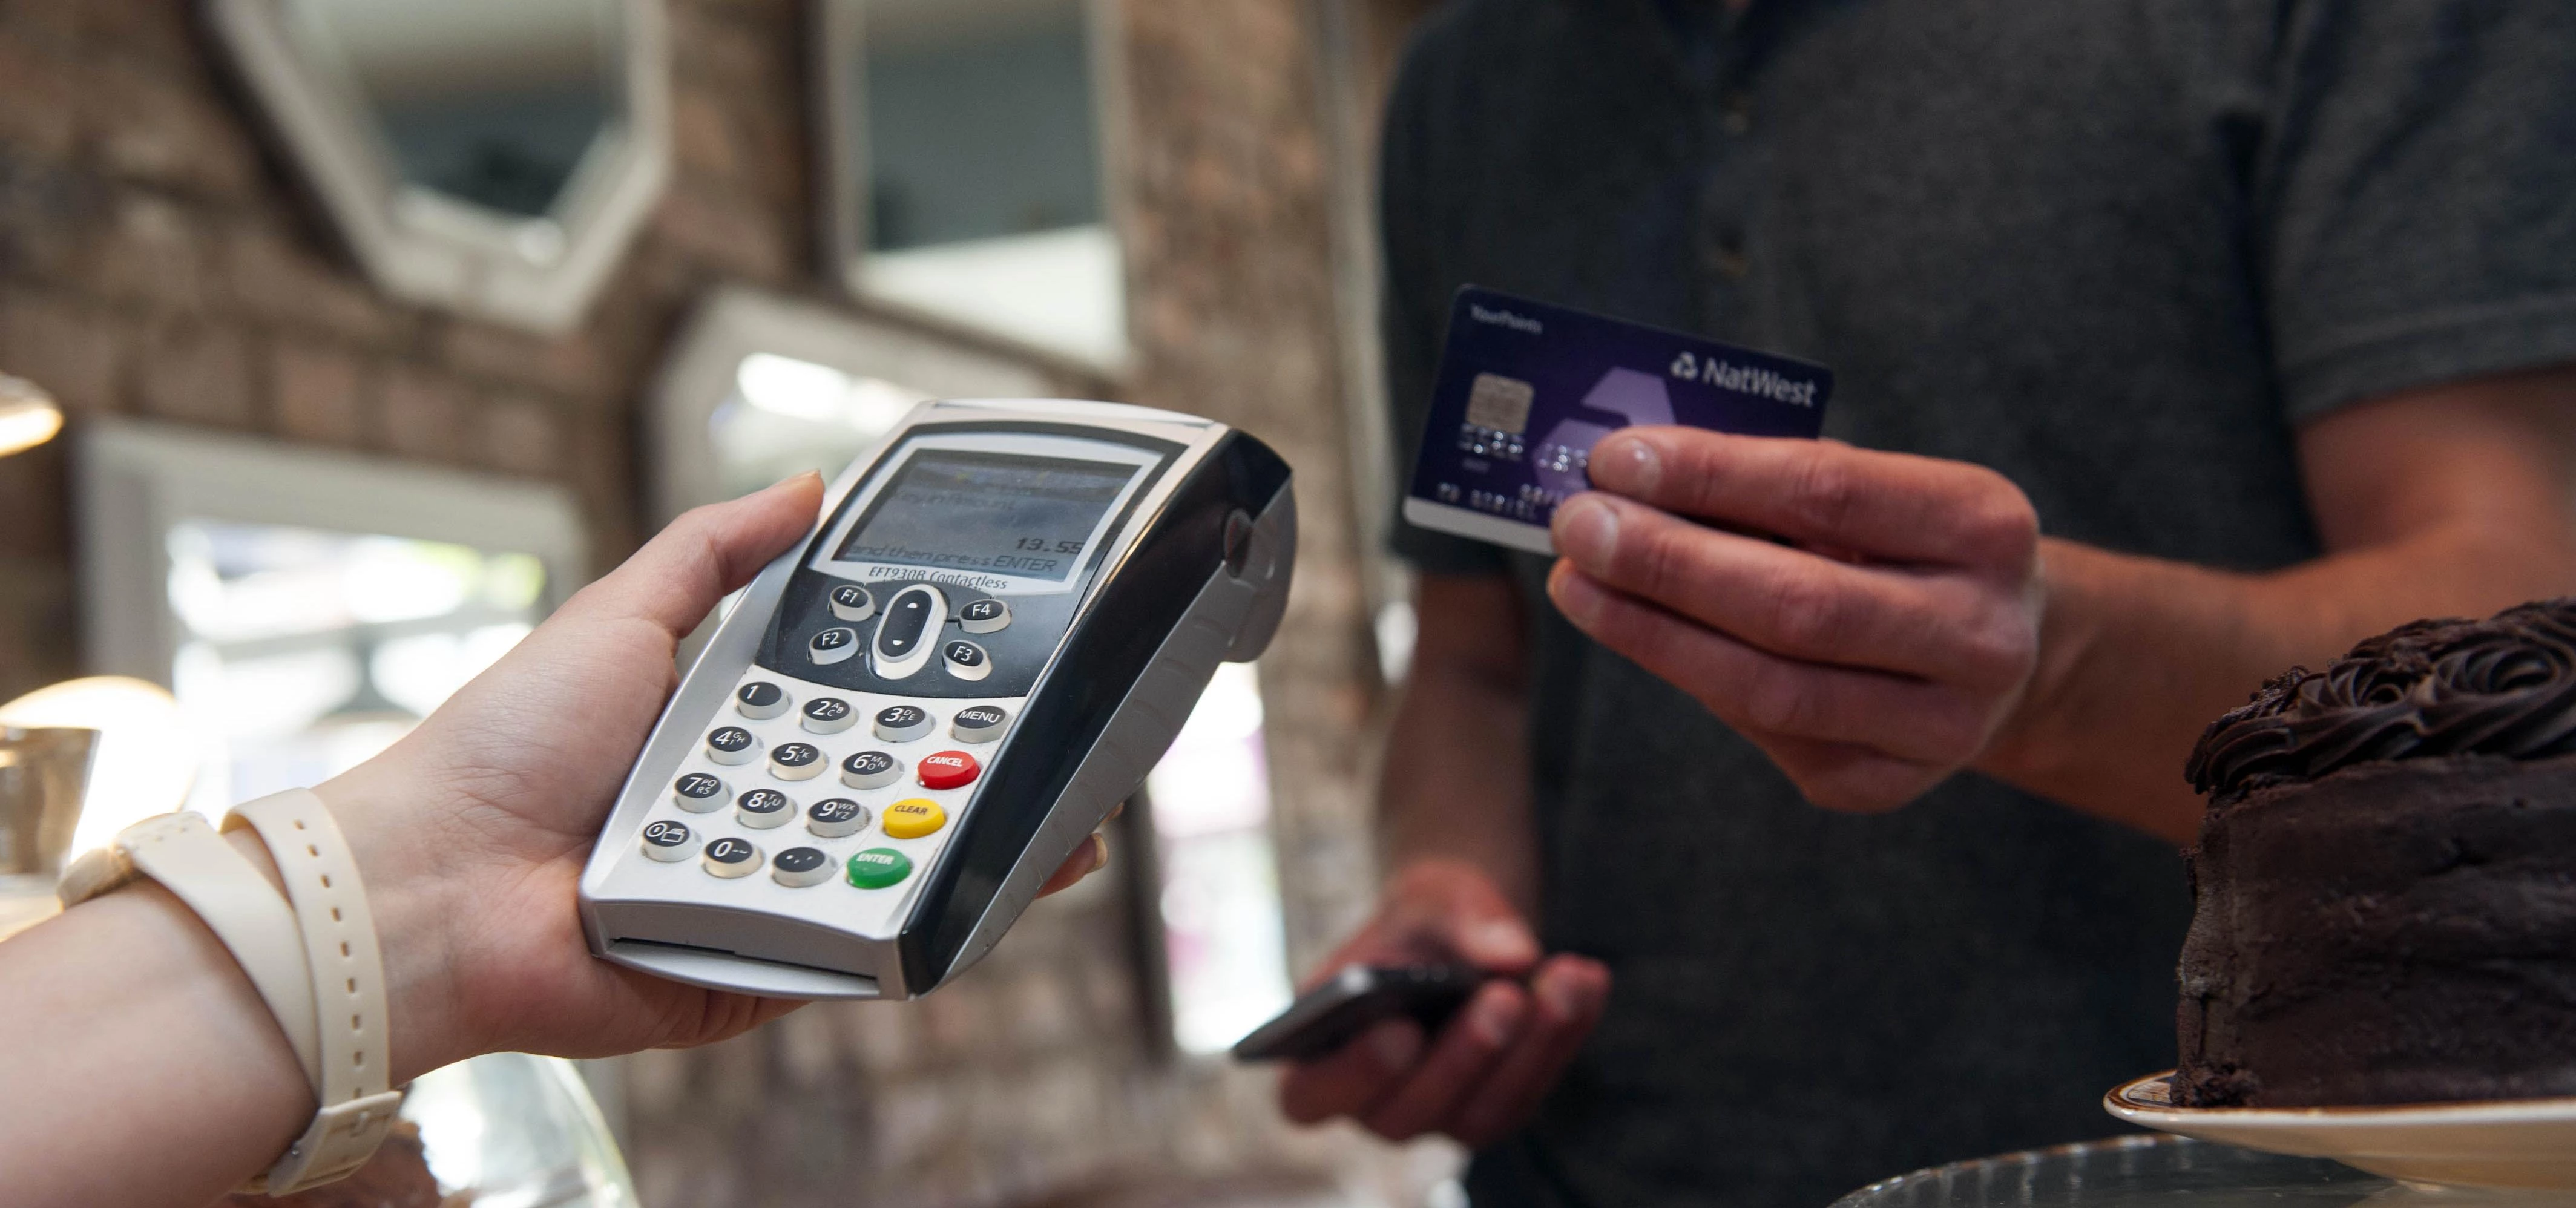 Cashless payments are driving small business growth as public habits change